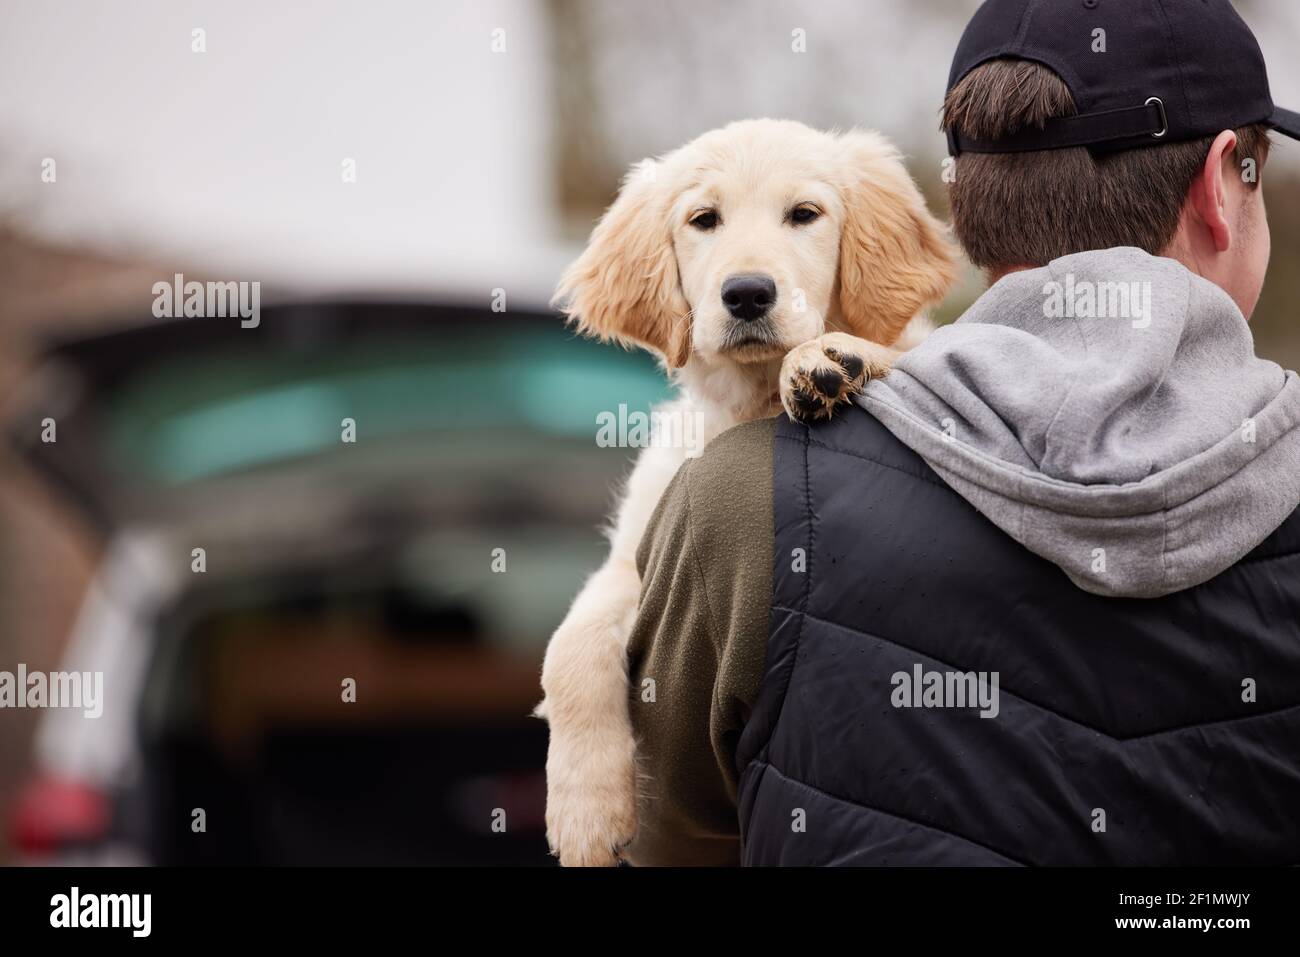 Male Criminal Stealing Or Dognapping Puppy During Health Lockdown Stock Photo